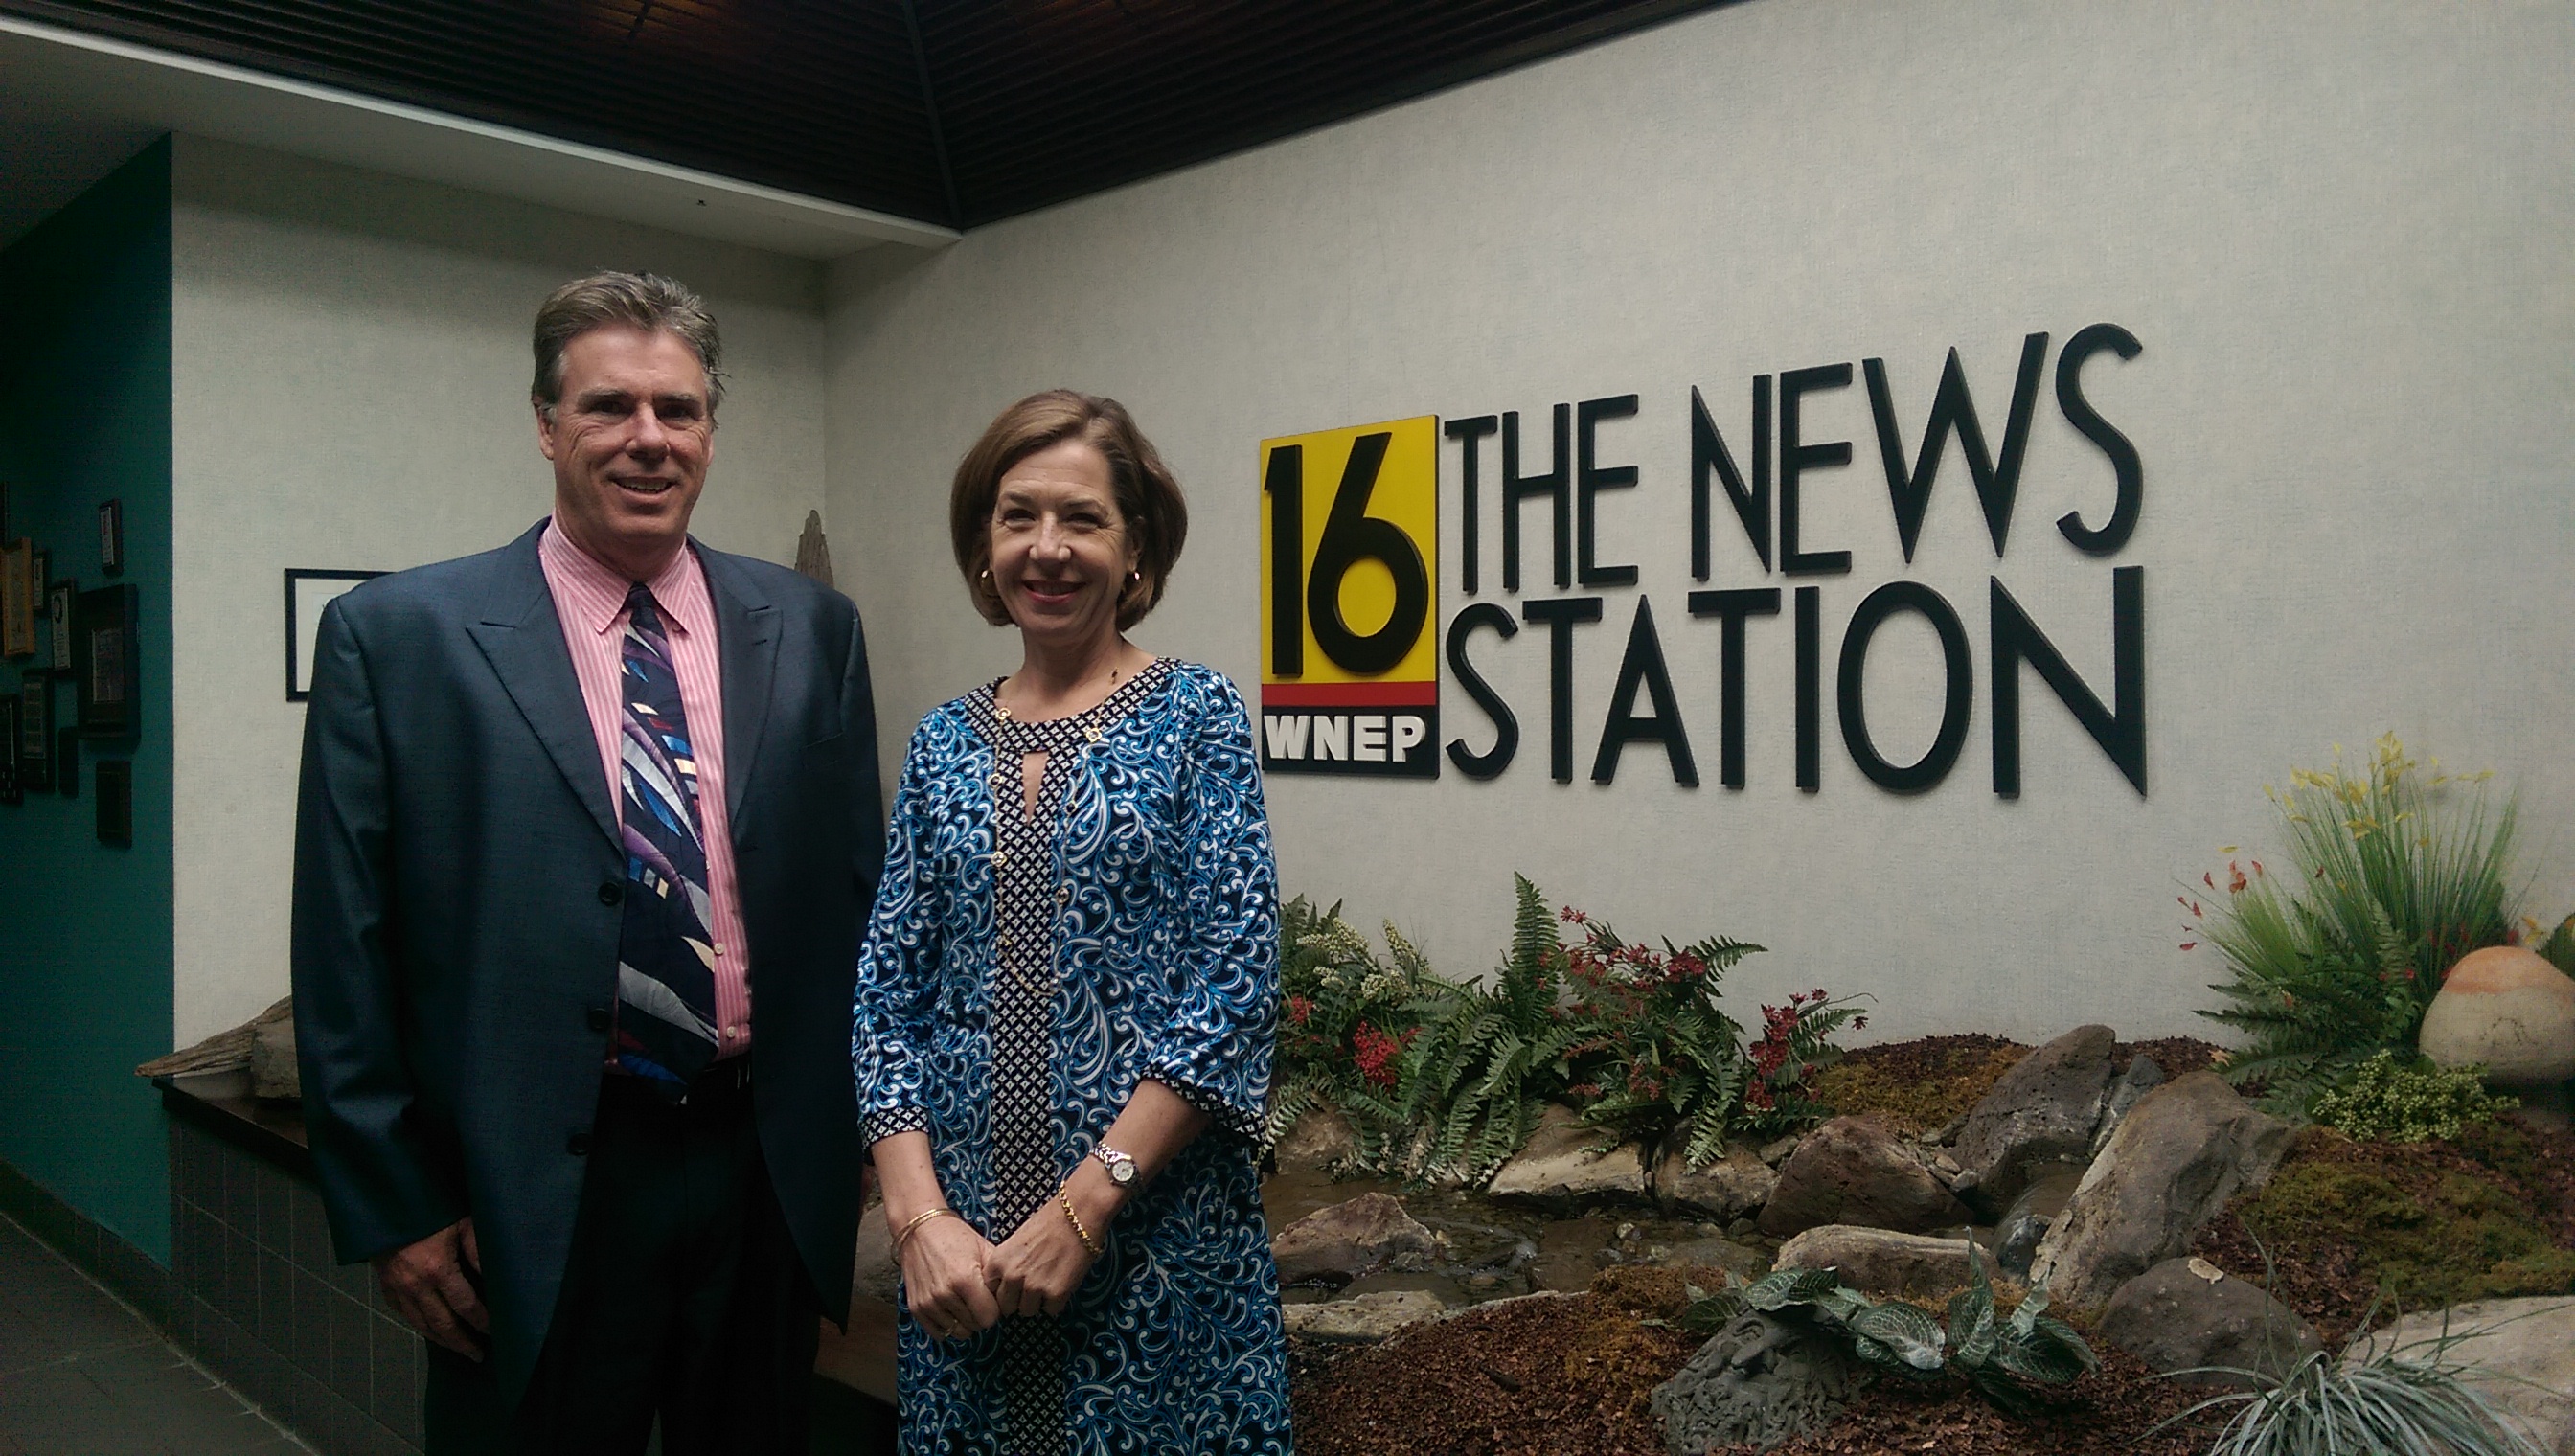  From left to right: Chuck Morgan, WNEP General Manager and Karen Saunders, Northeast Regional Cancer Institute President.